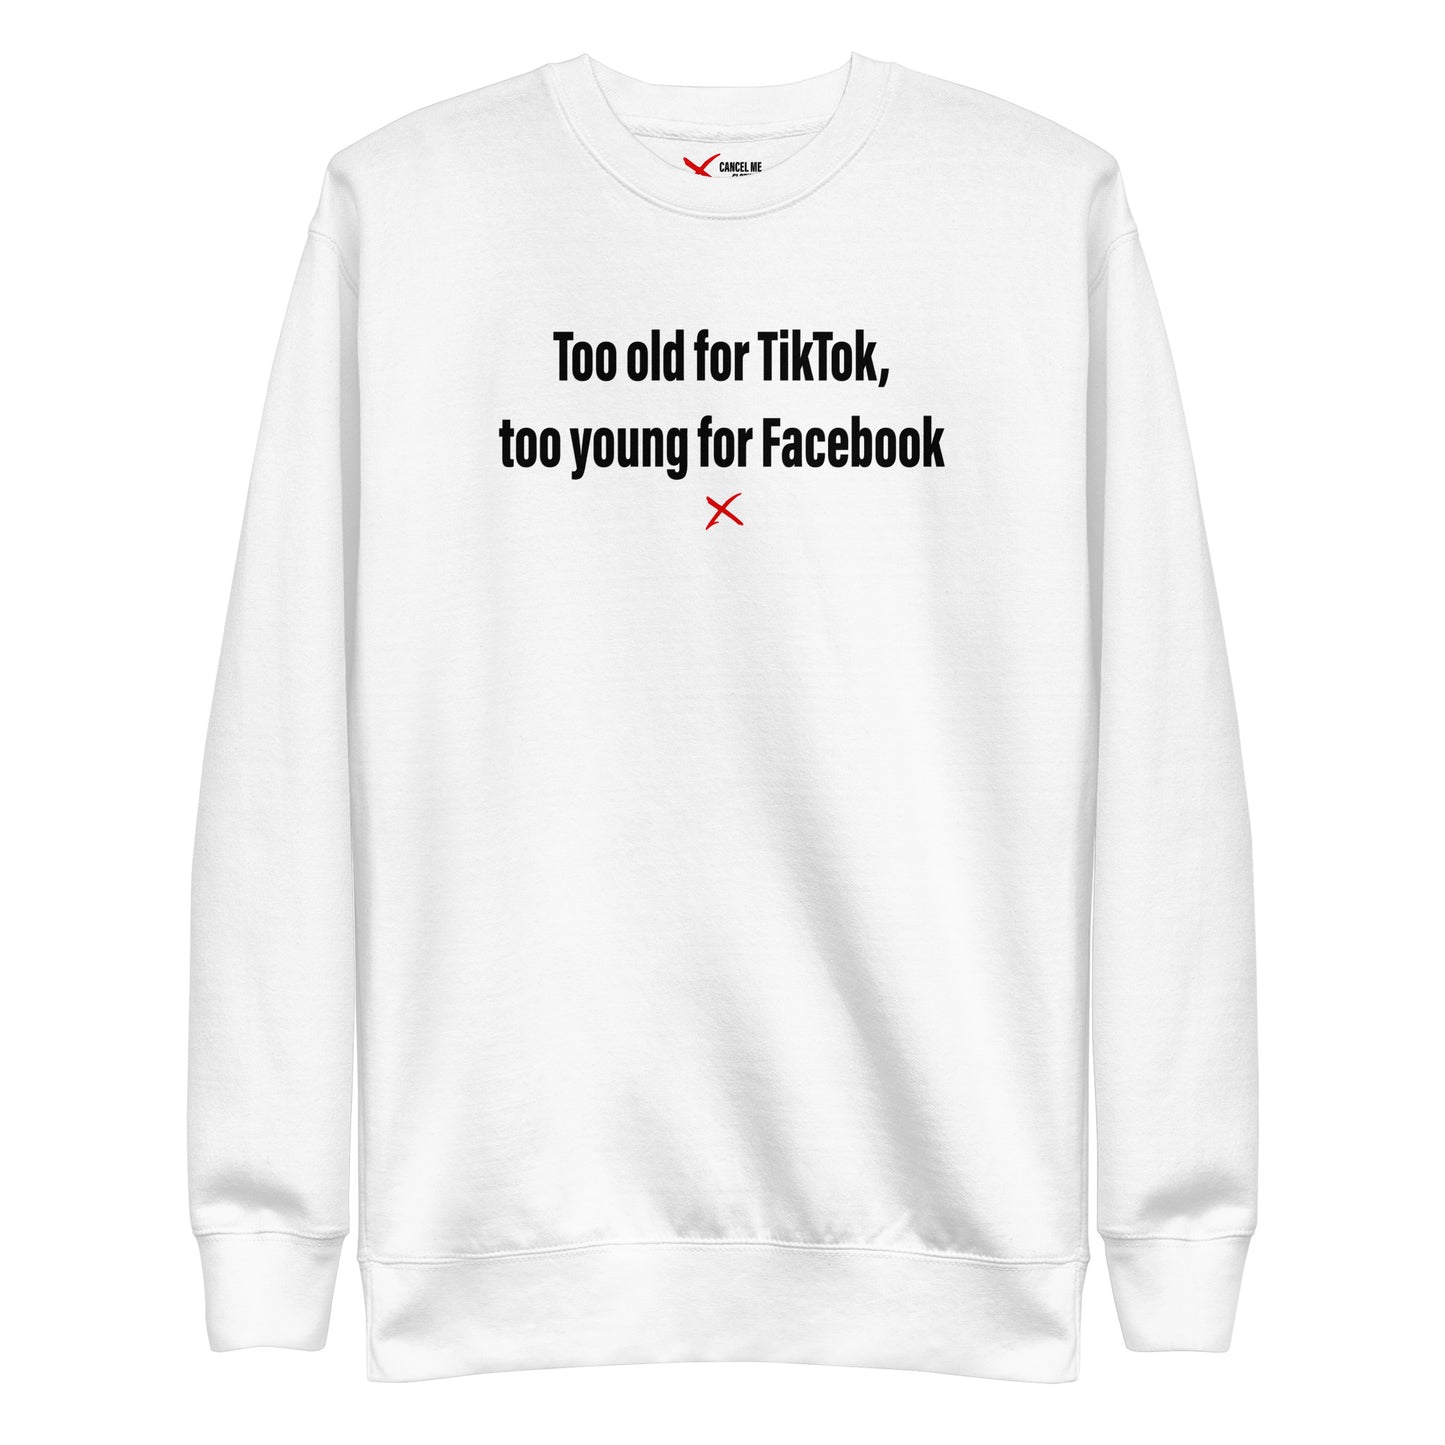 Too old for TikTok, too young for Facebook - Sweatshirt